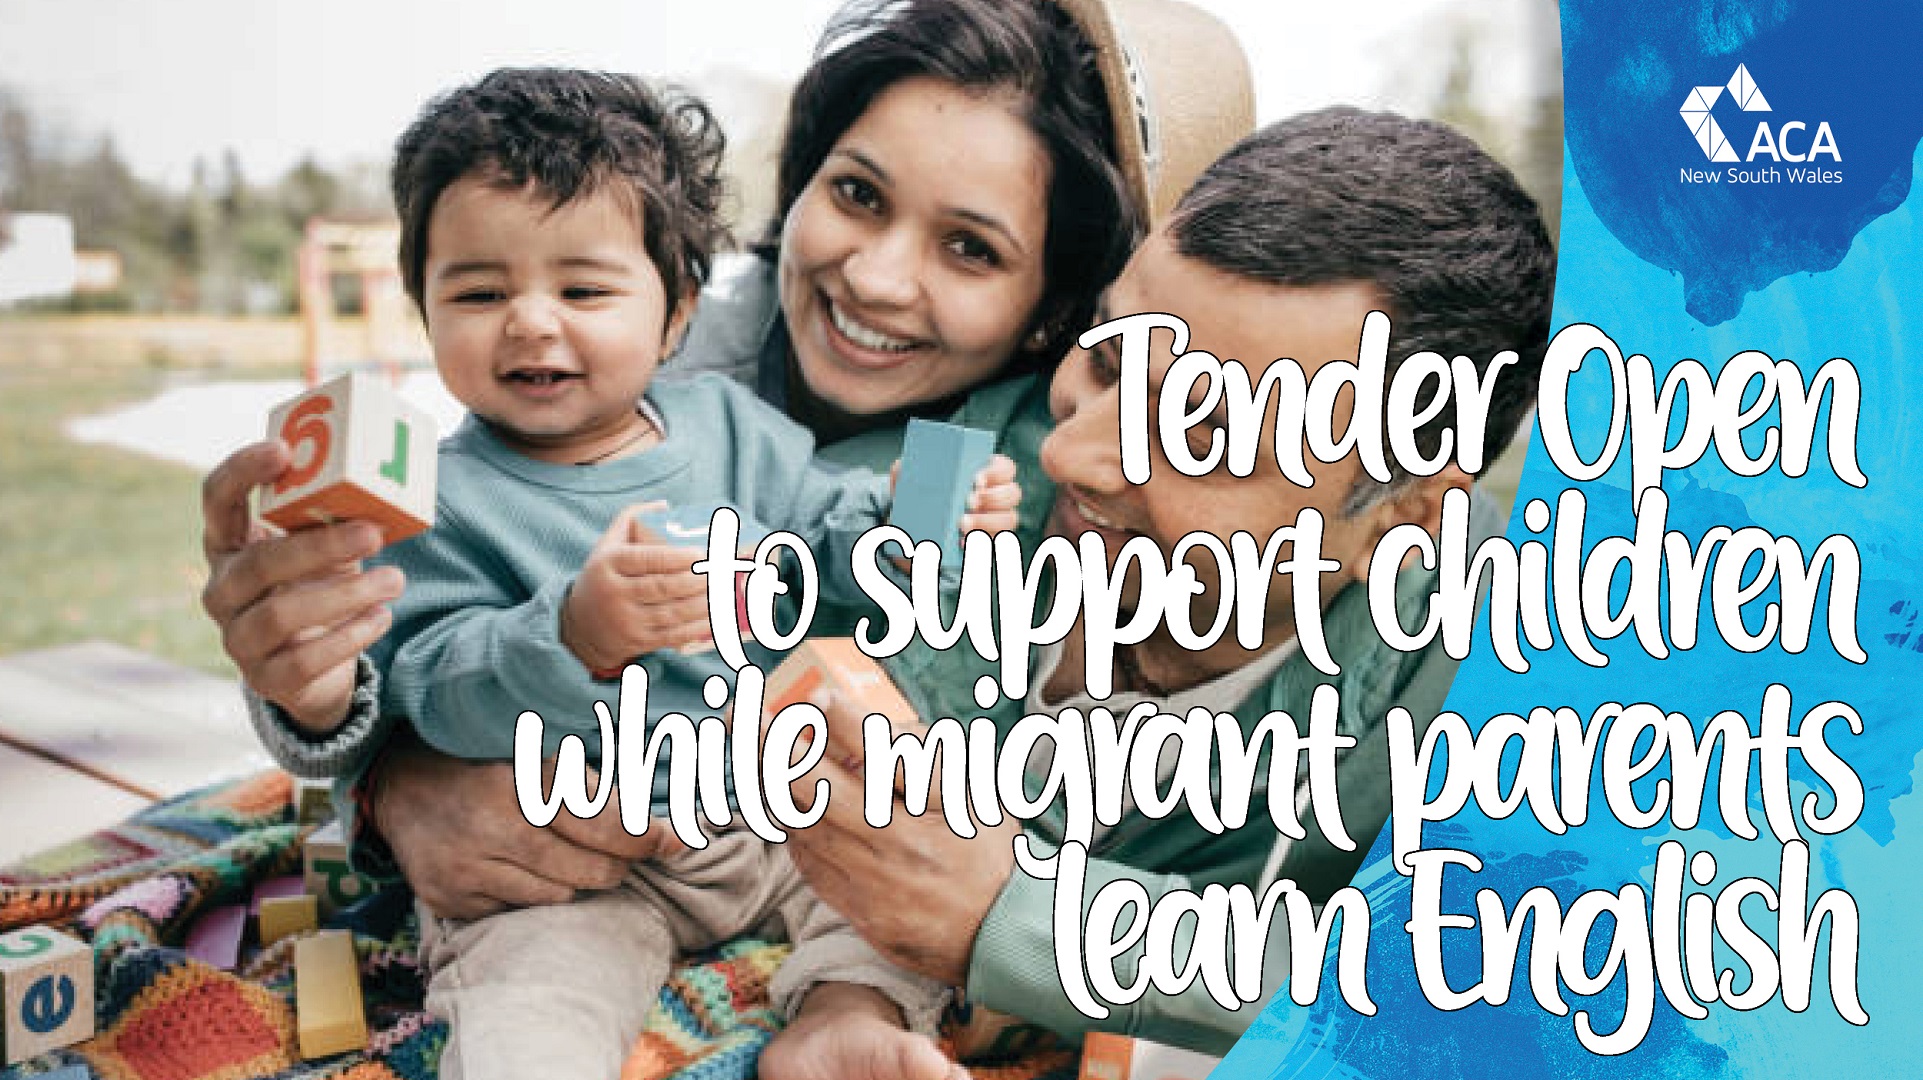 Tenders open to support children while migrant parents learn English